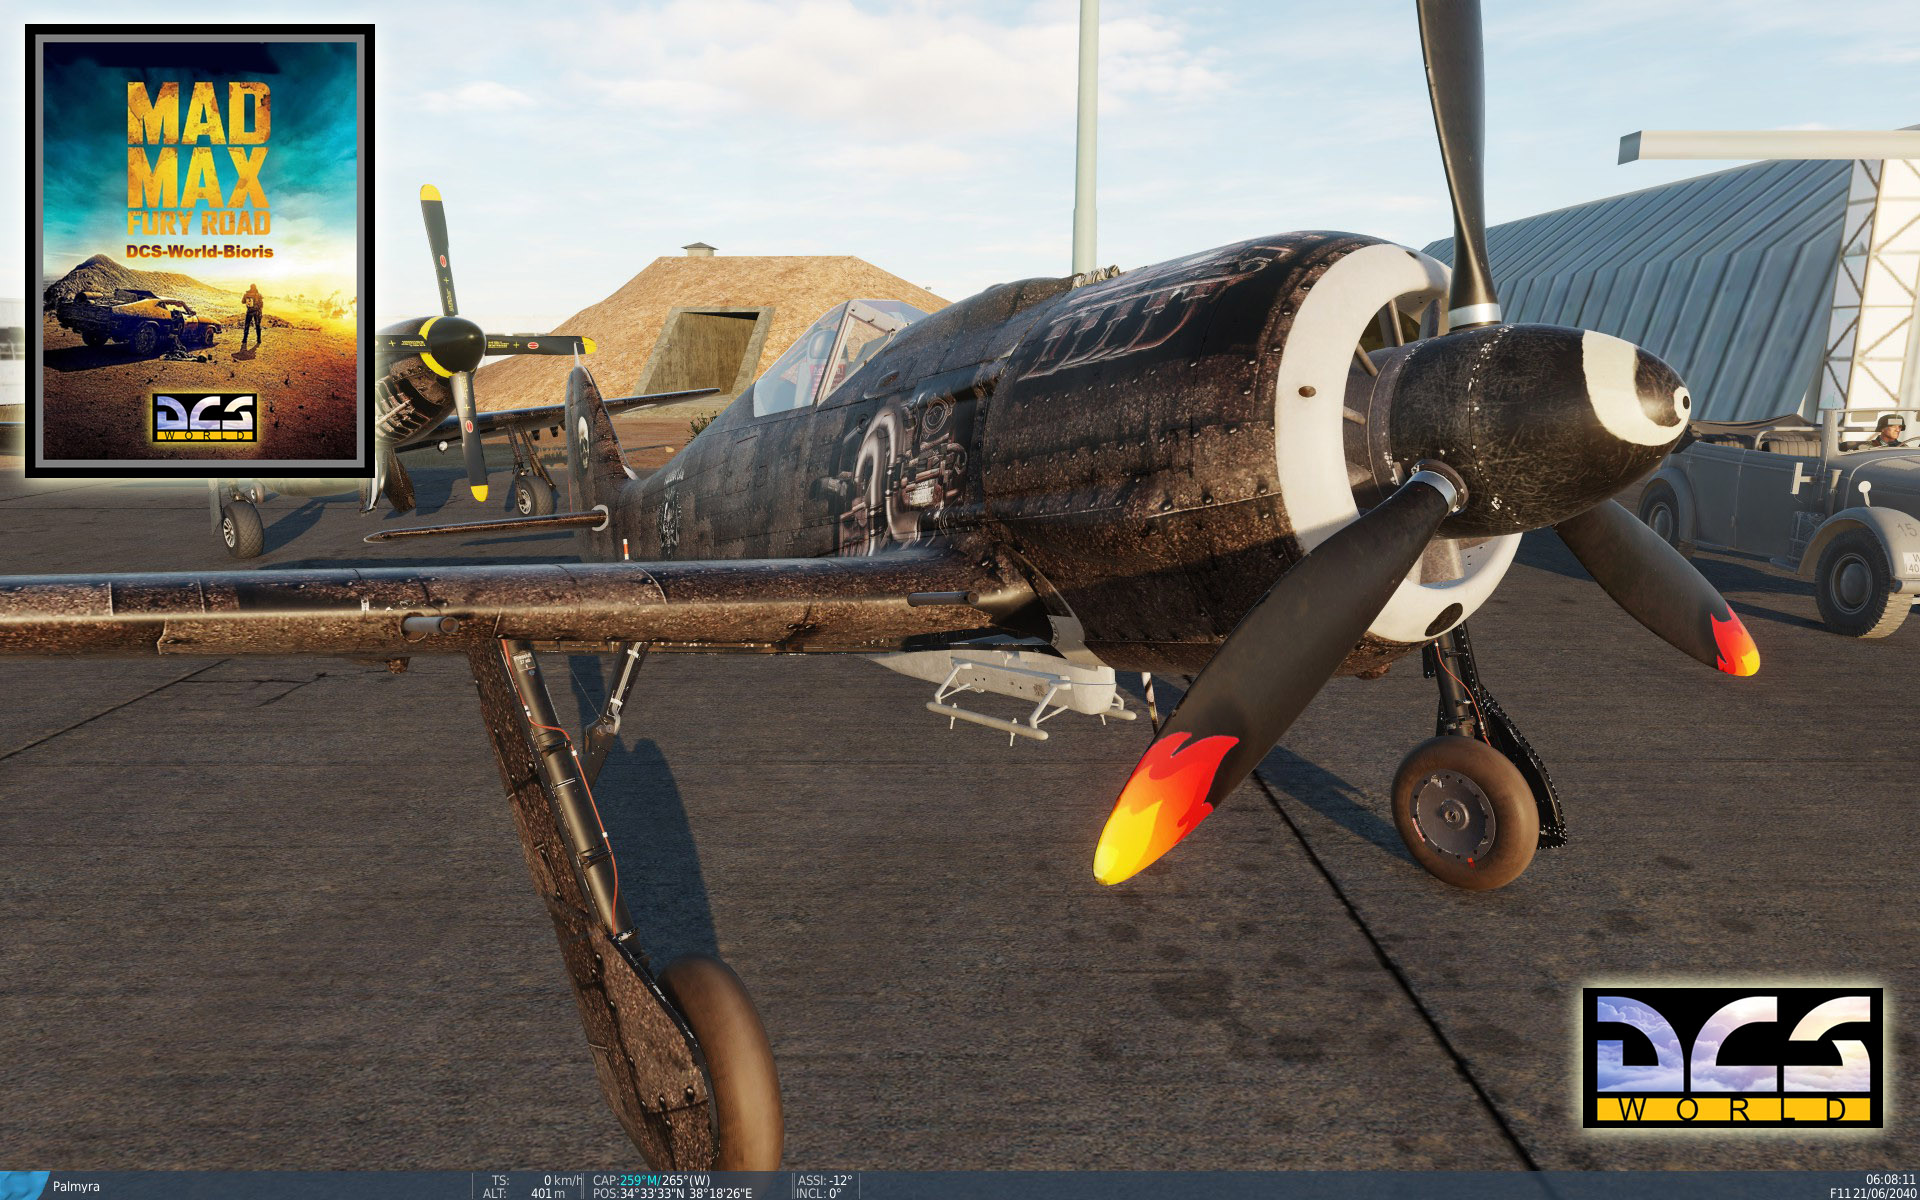 FW190-A8 MAD MAX Skin for Mad Max Missions